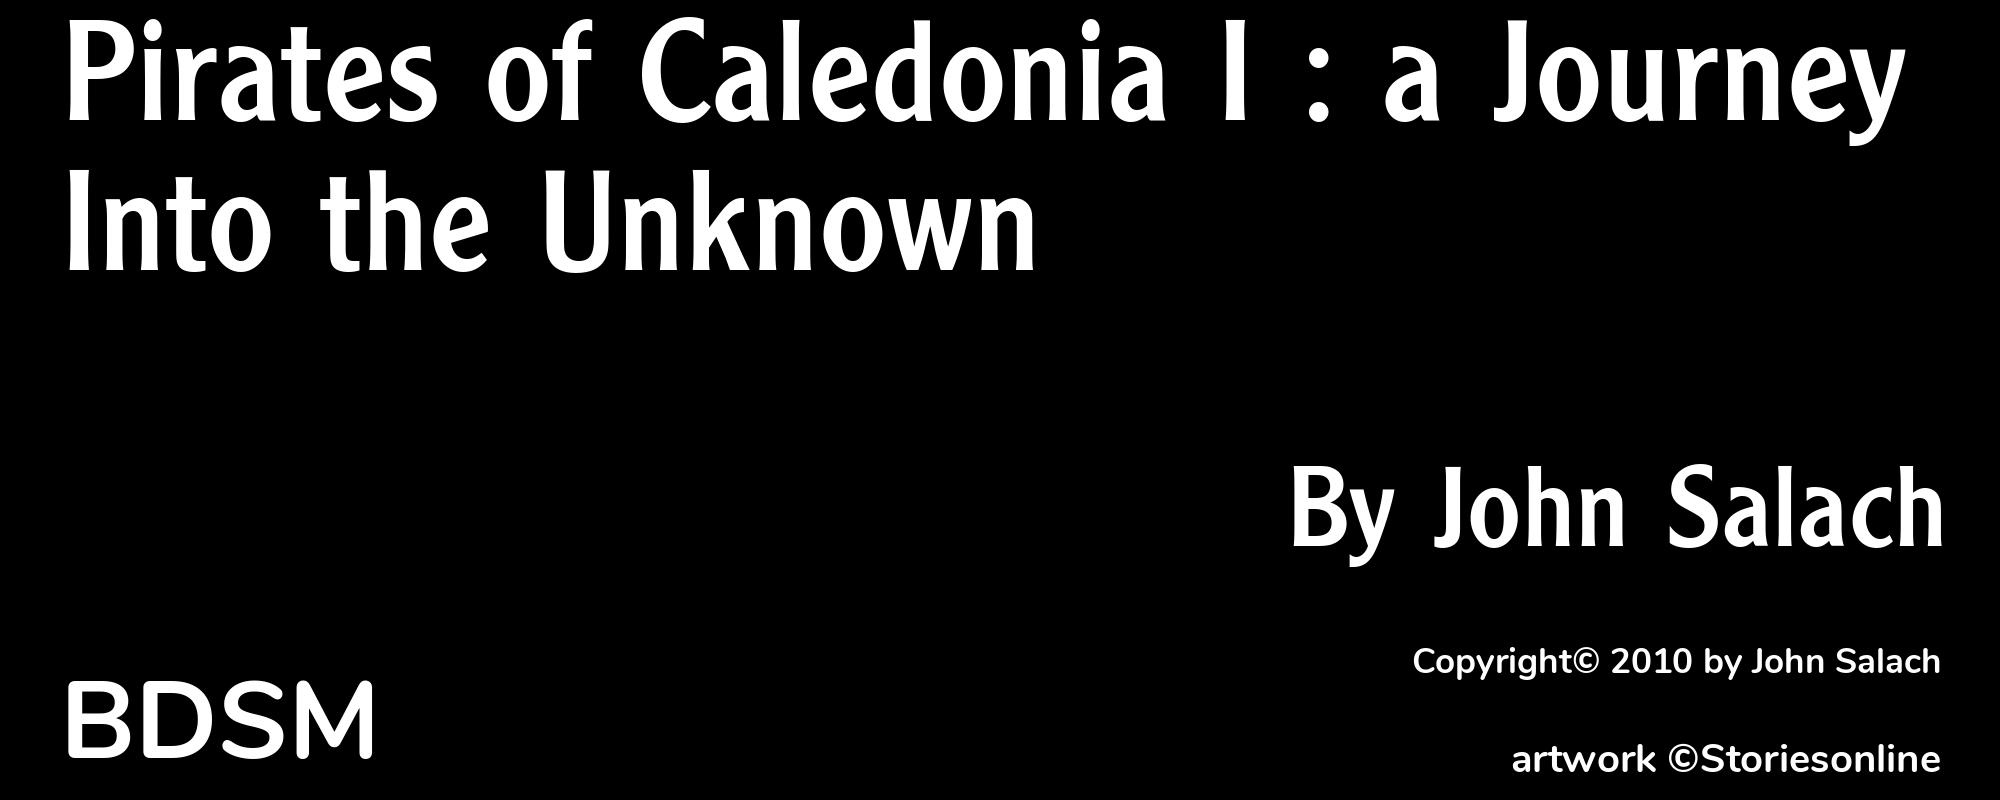 Pirates of Caledonia I : a Journey Into the Unknown - Cover